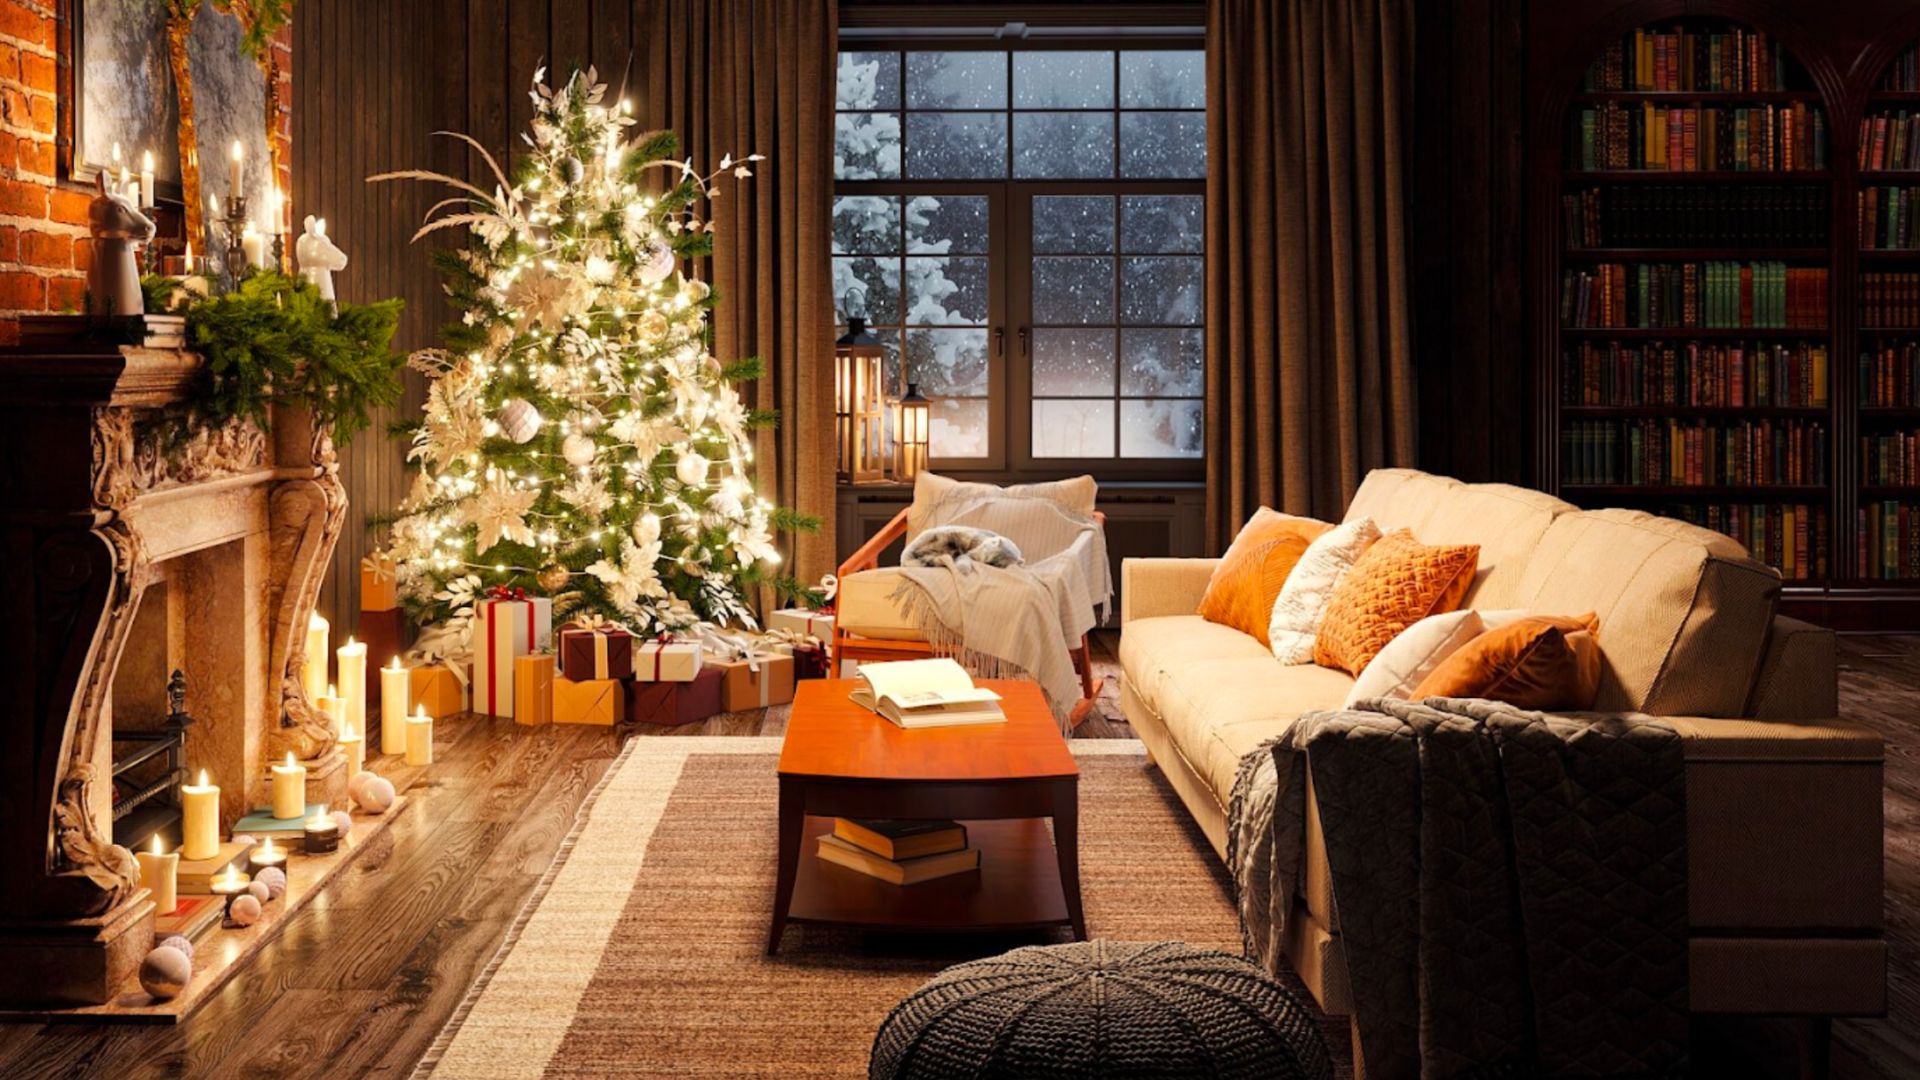 A cozy room adorned with festive holiday decorations, evoking the warm ambiance of winter celebrations, perfectly illustrating the potential of seasonal product campaigns.